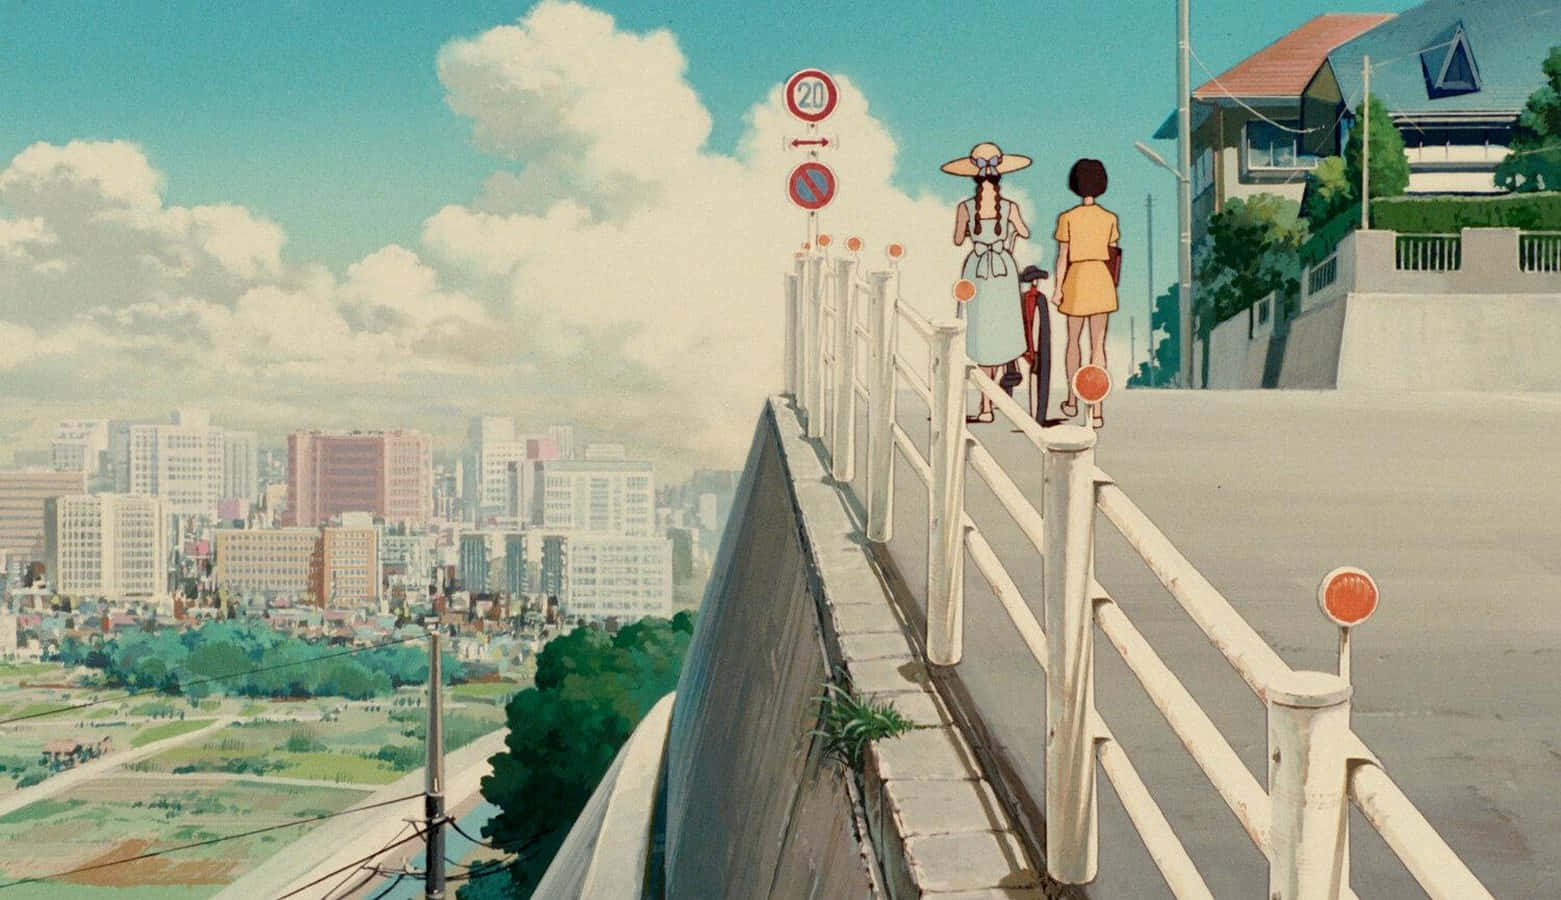 Captivating Anime Architecture in Whisper of the Heart Wallpaper